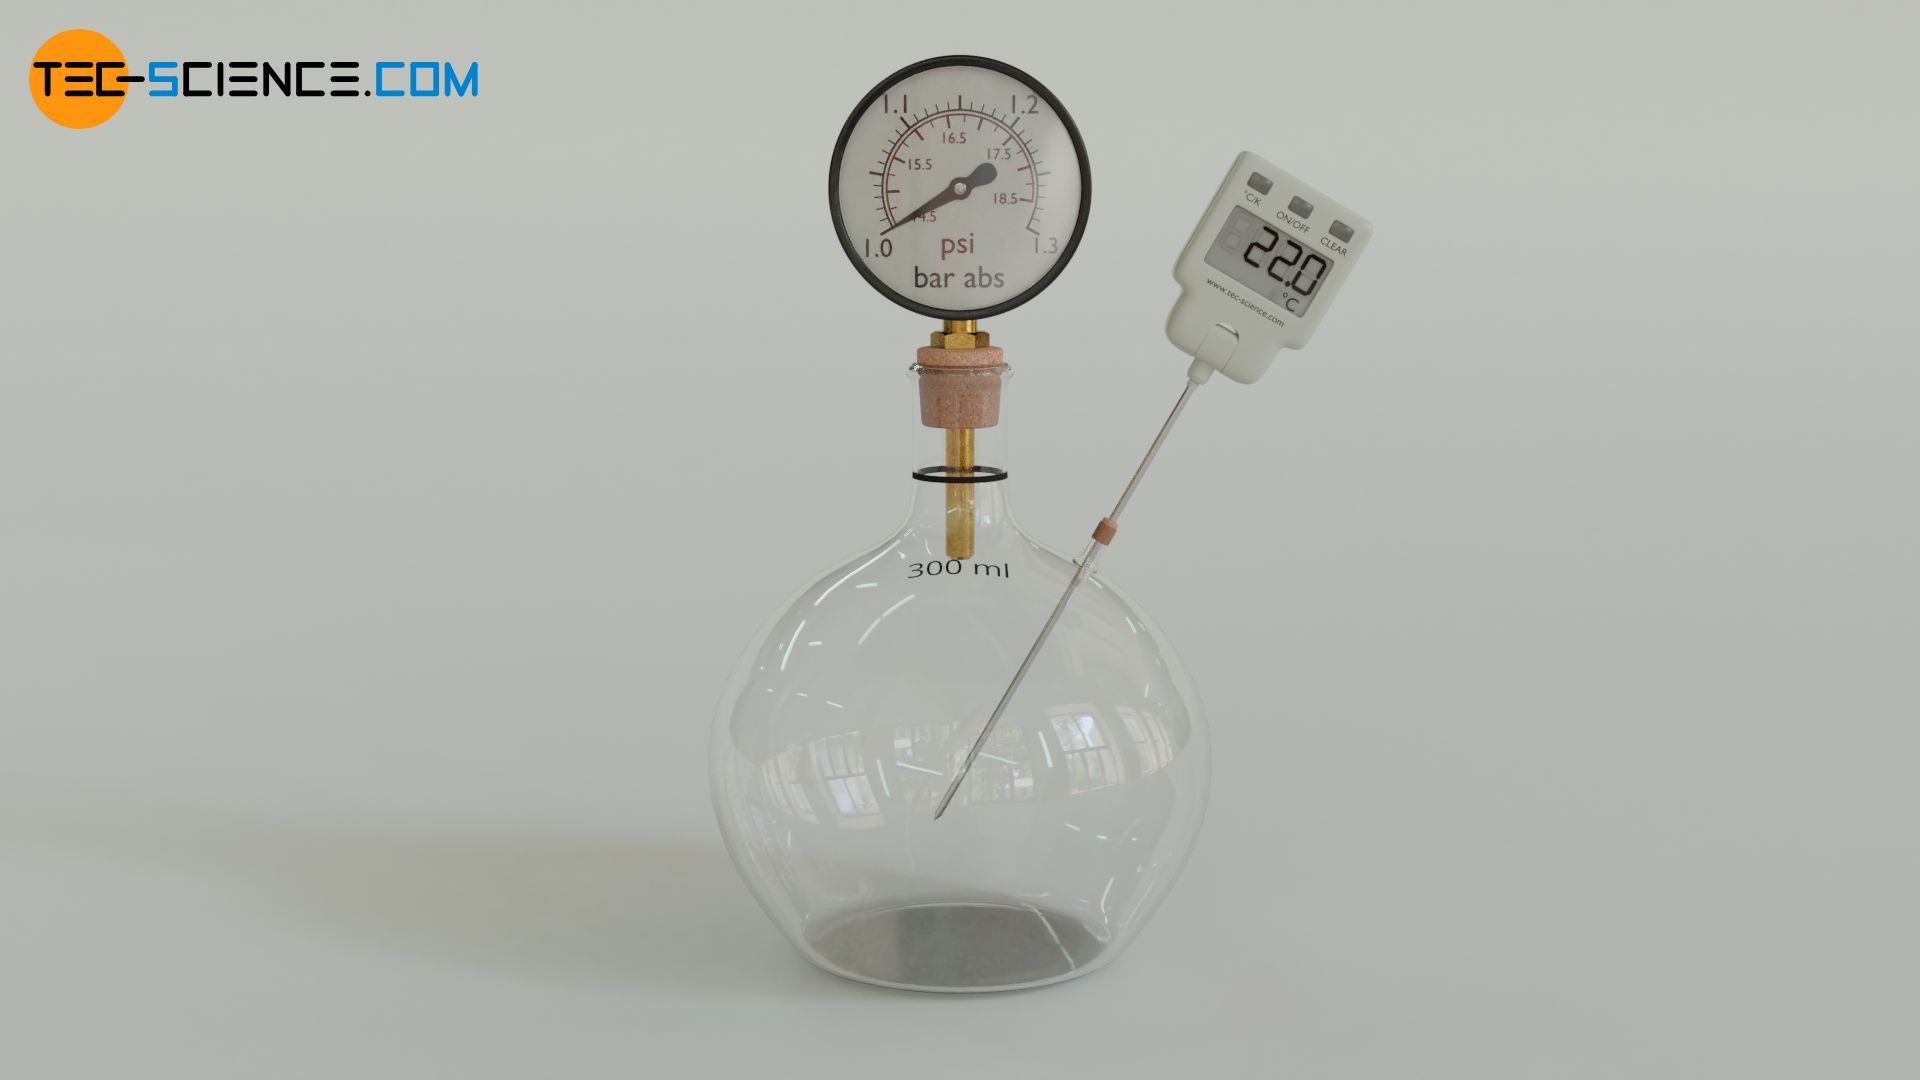 Experiment to investigate the relationship between pressure and temperature at constant volume